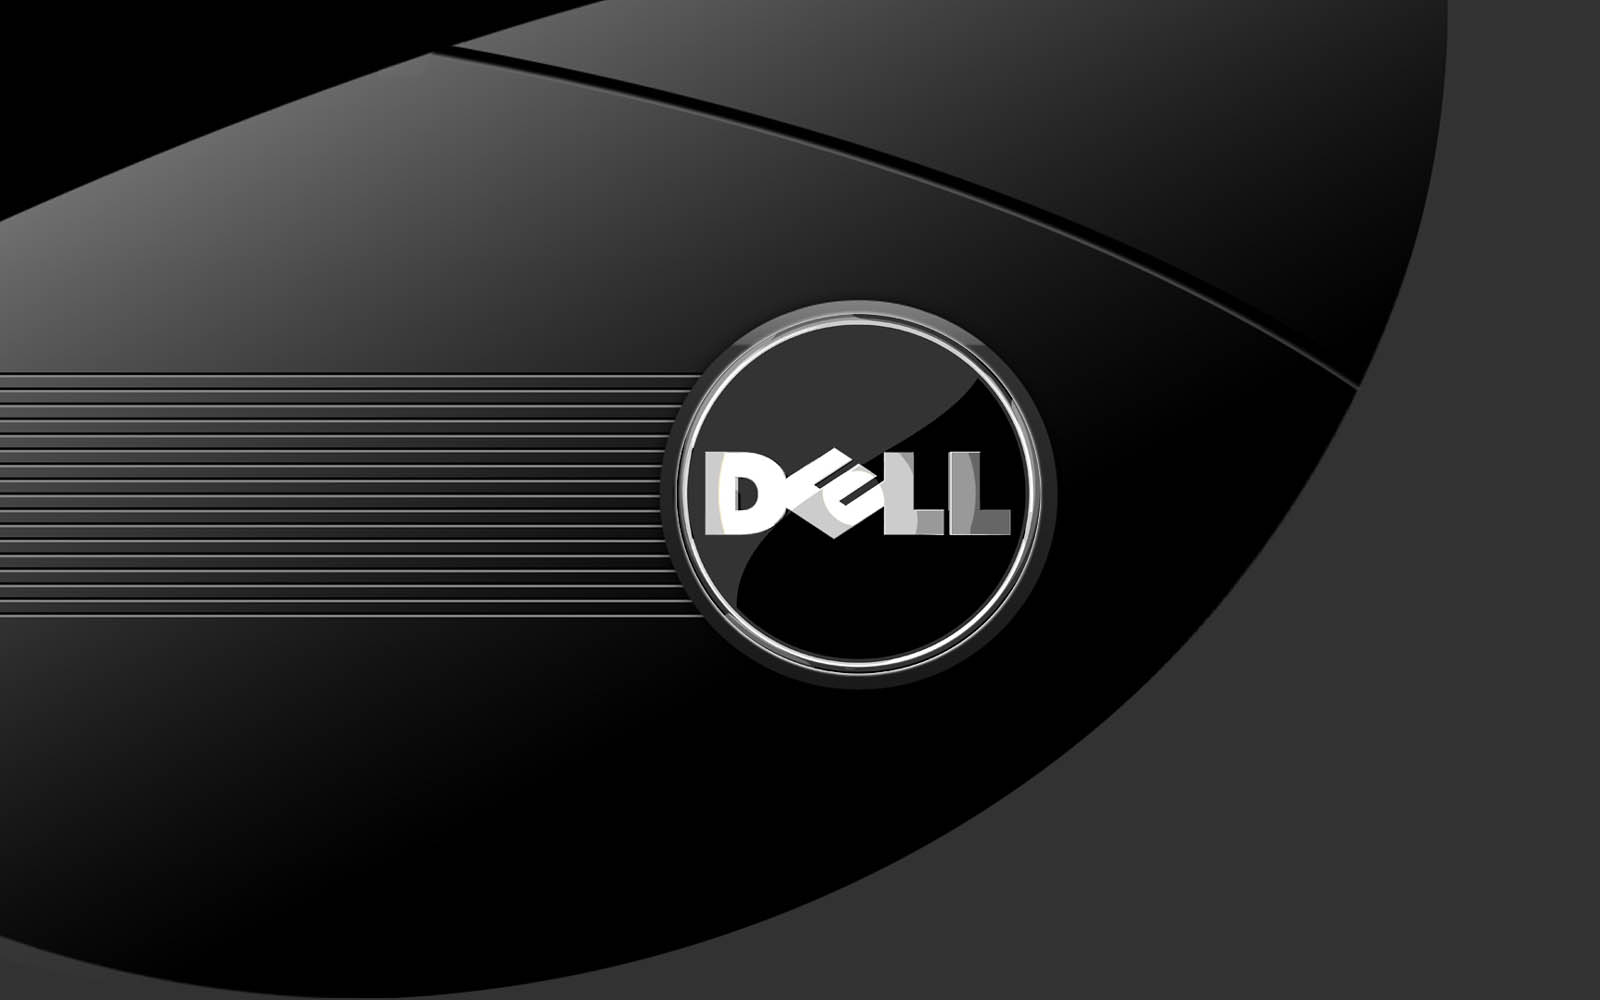 Tag Dell Wallpaper Image Photos Pictures And Background For